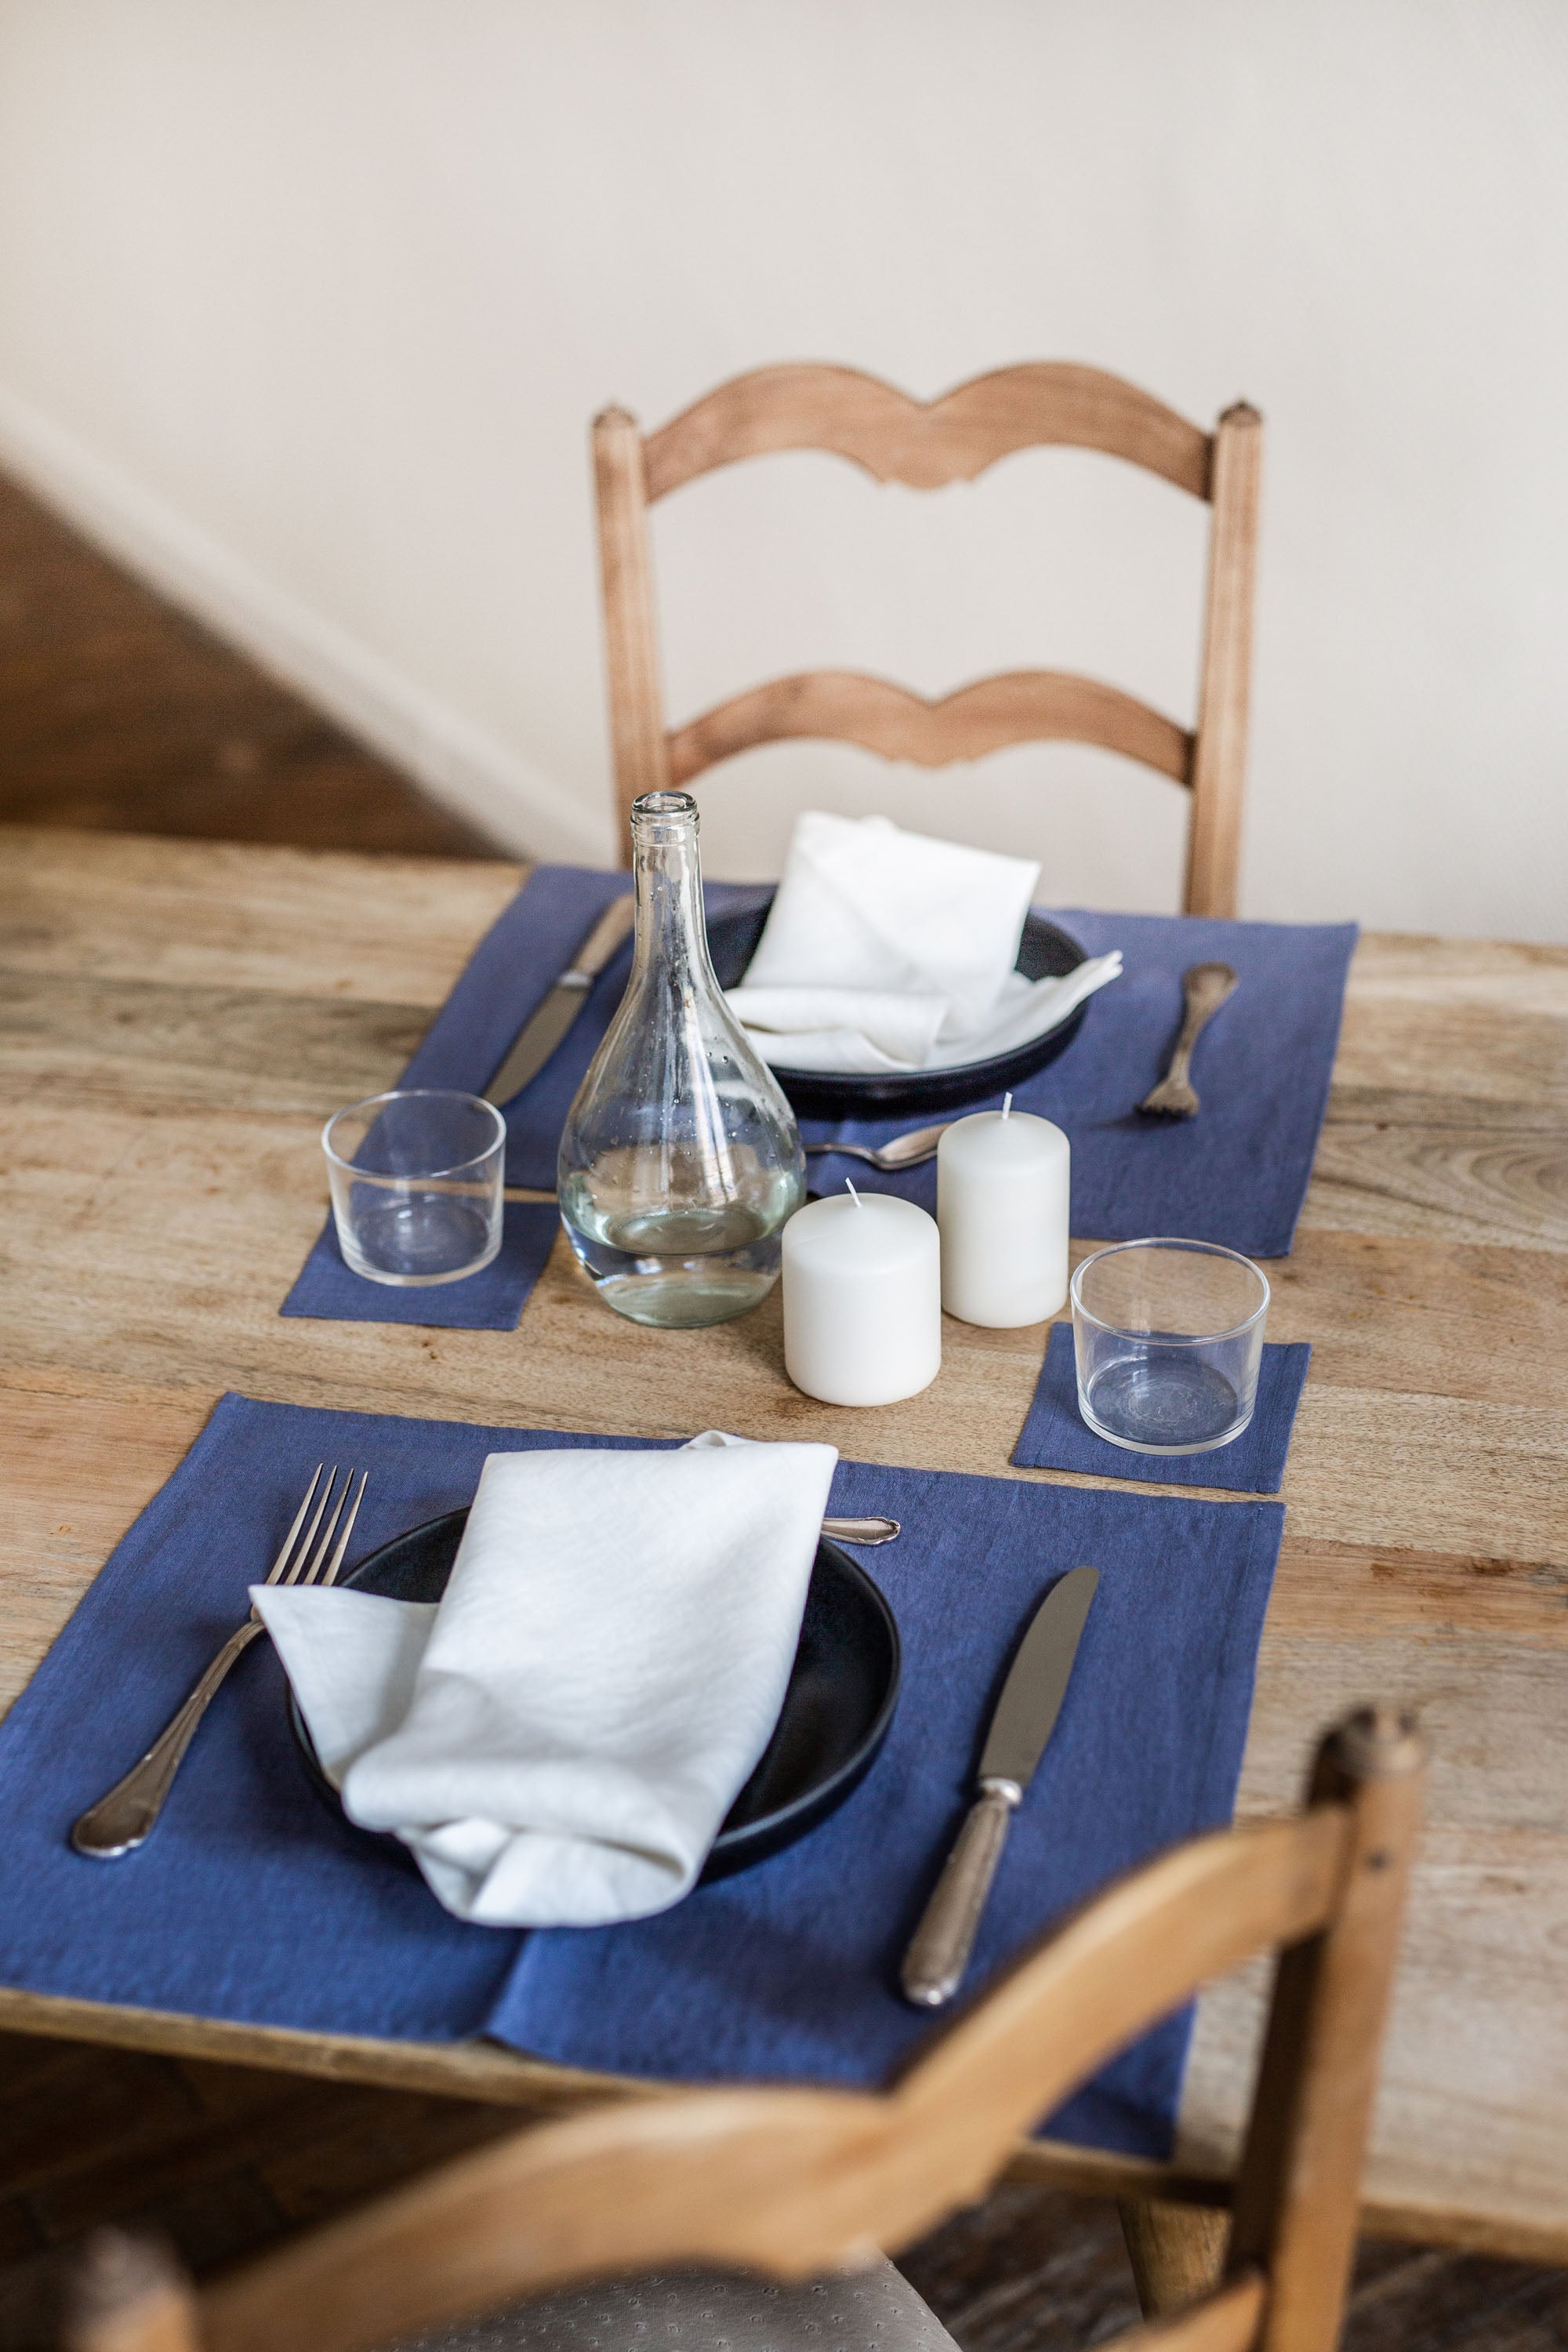 Set Dinner Table With A Blue Linen Placement By AmourlInen 